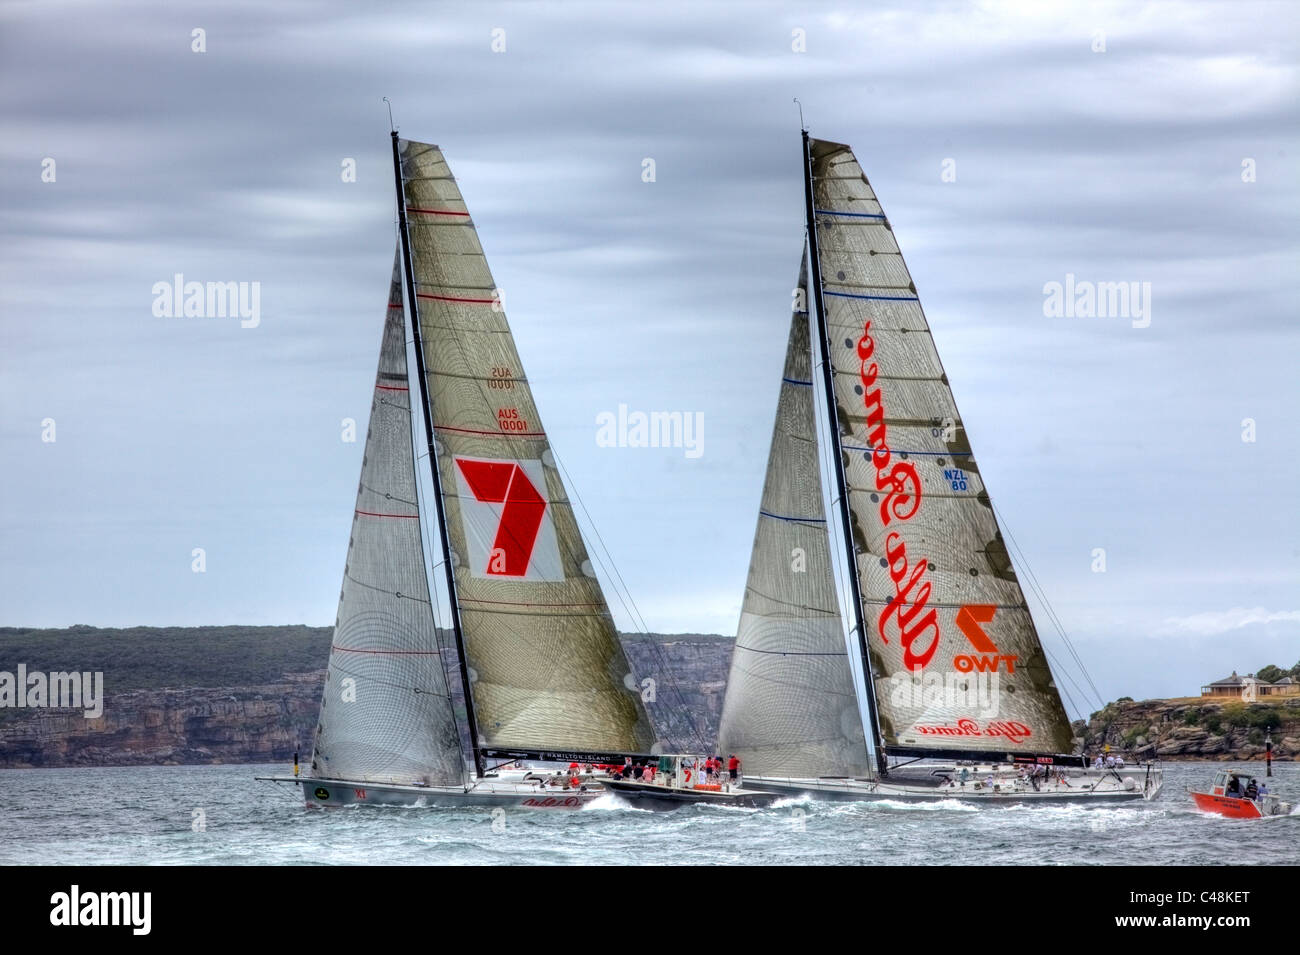 The super maxi yachts Wild Oats racing against Alfa Romeo during The  SOLAS Big Boat challenge 2009, Sydney Harbour, Australia. Stock Photo